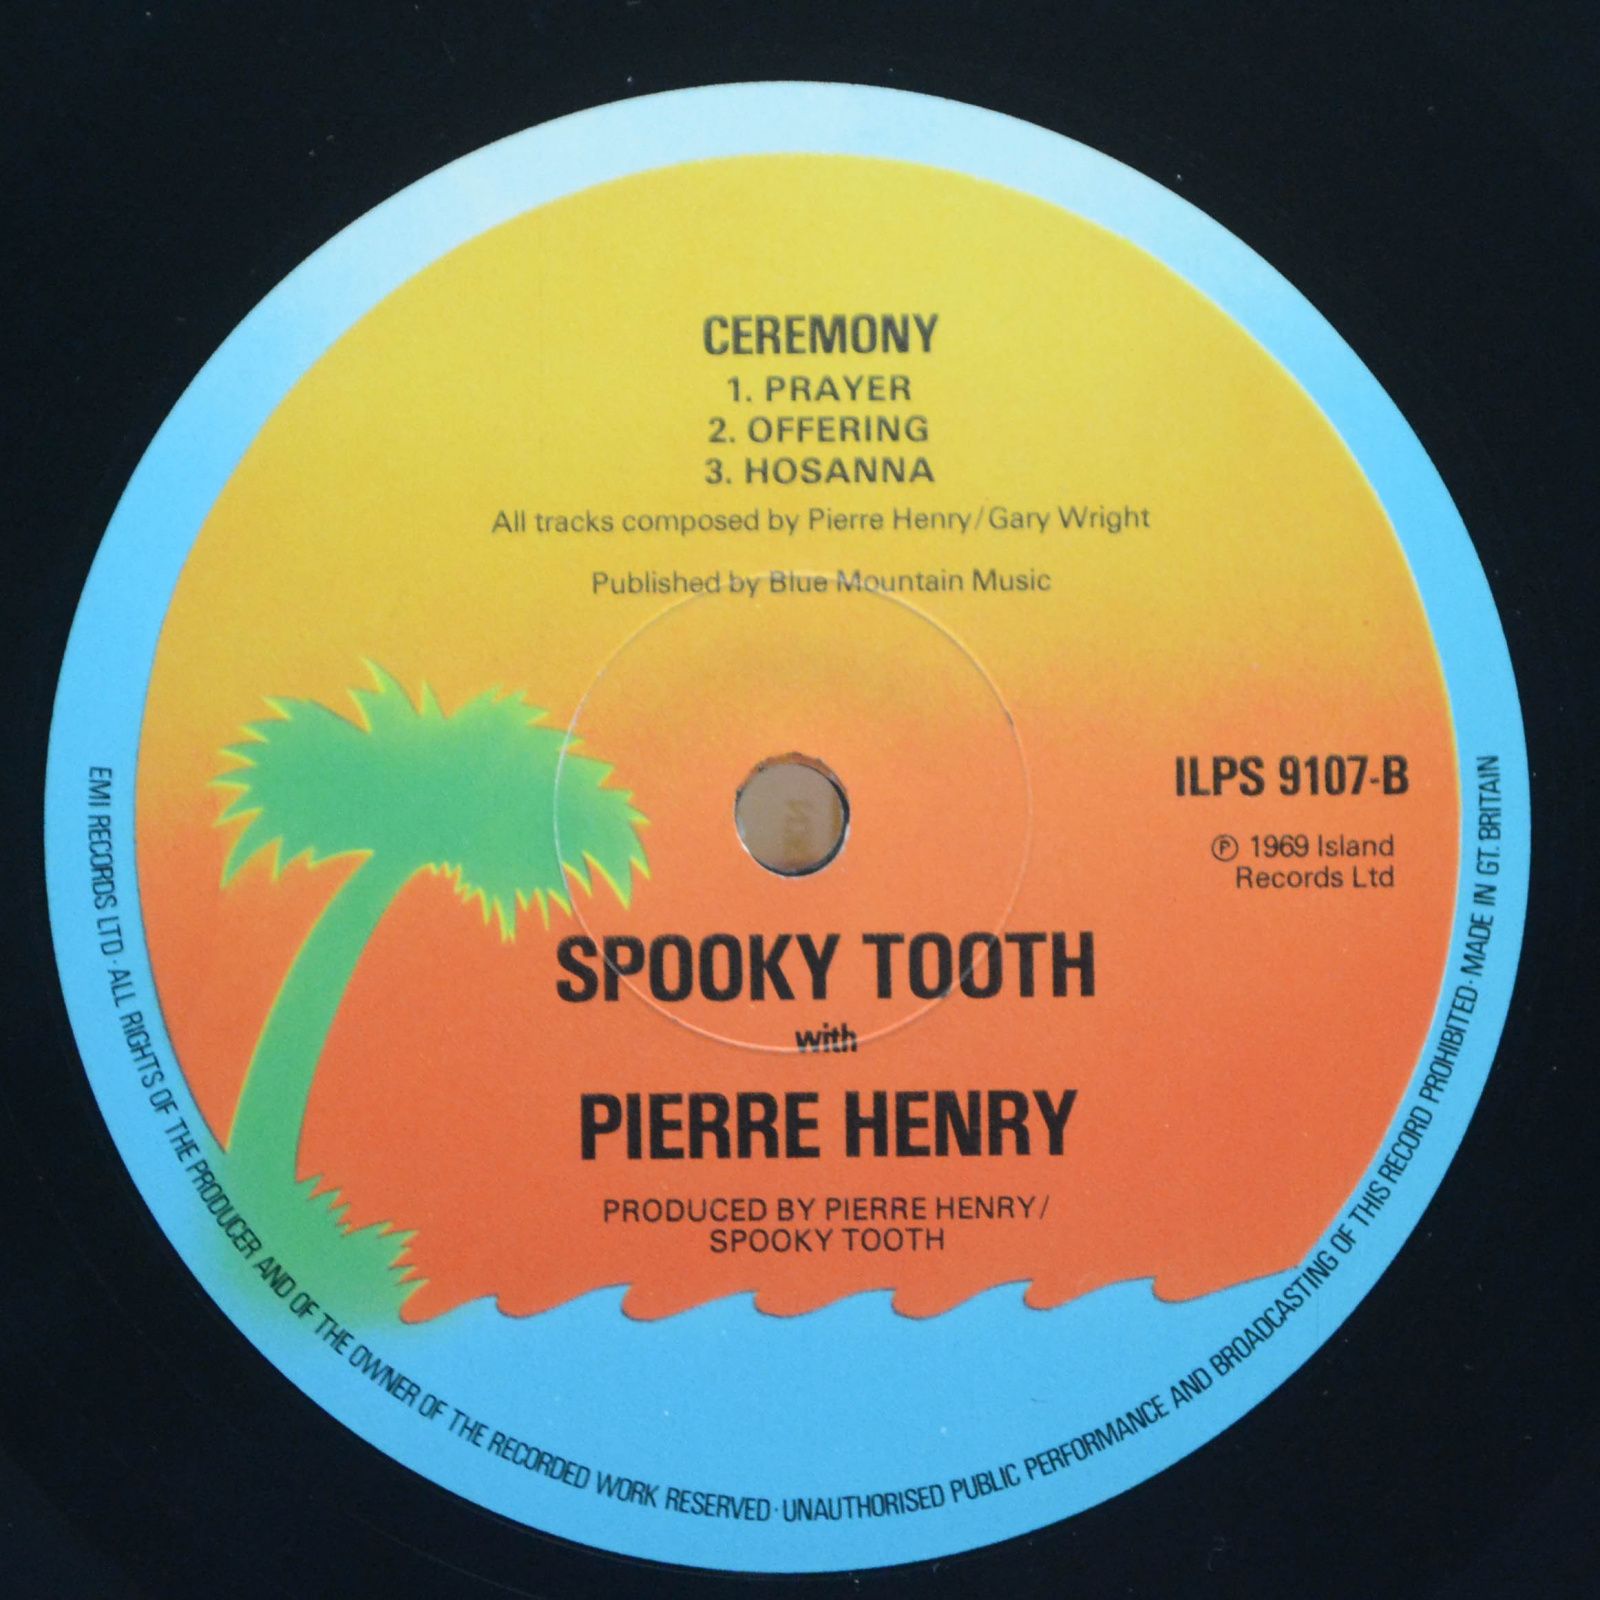 Spooky Tooth / Pierre Henry — Ceremony. An Electronic Mass. (UK), 1969